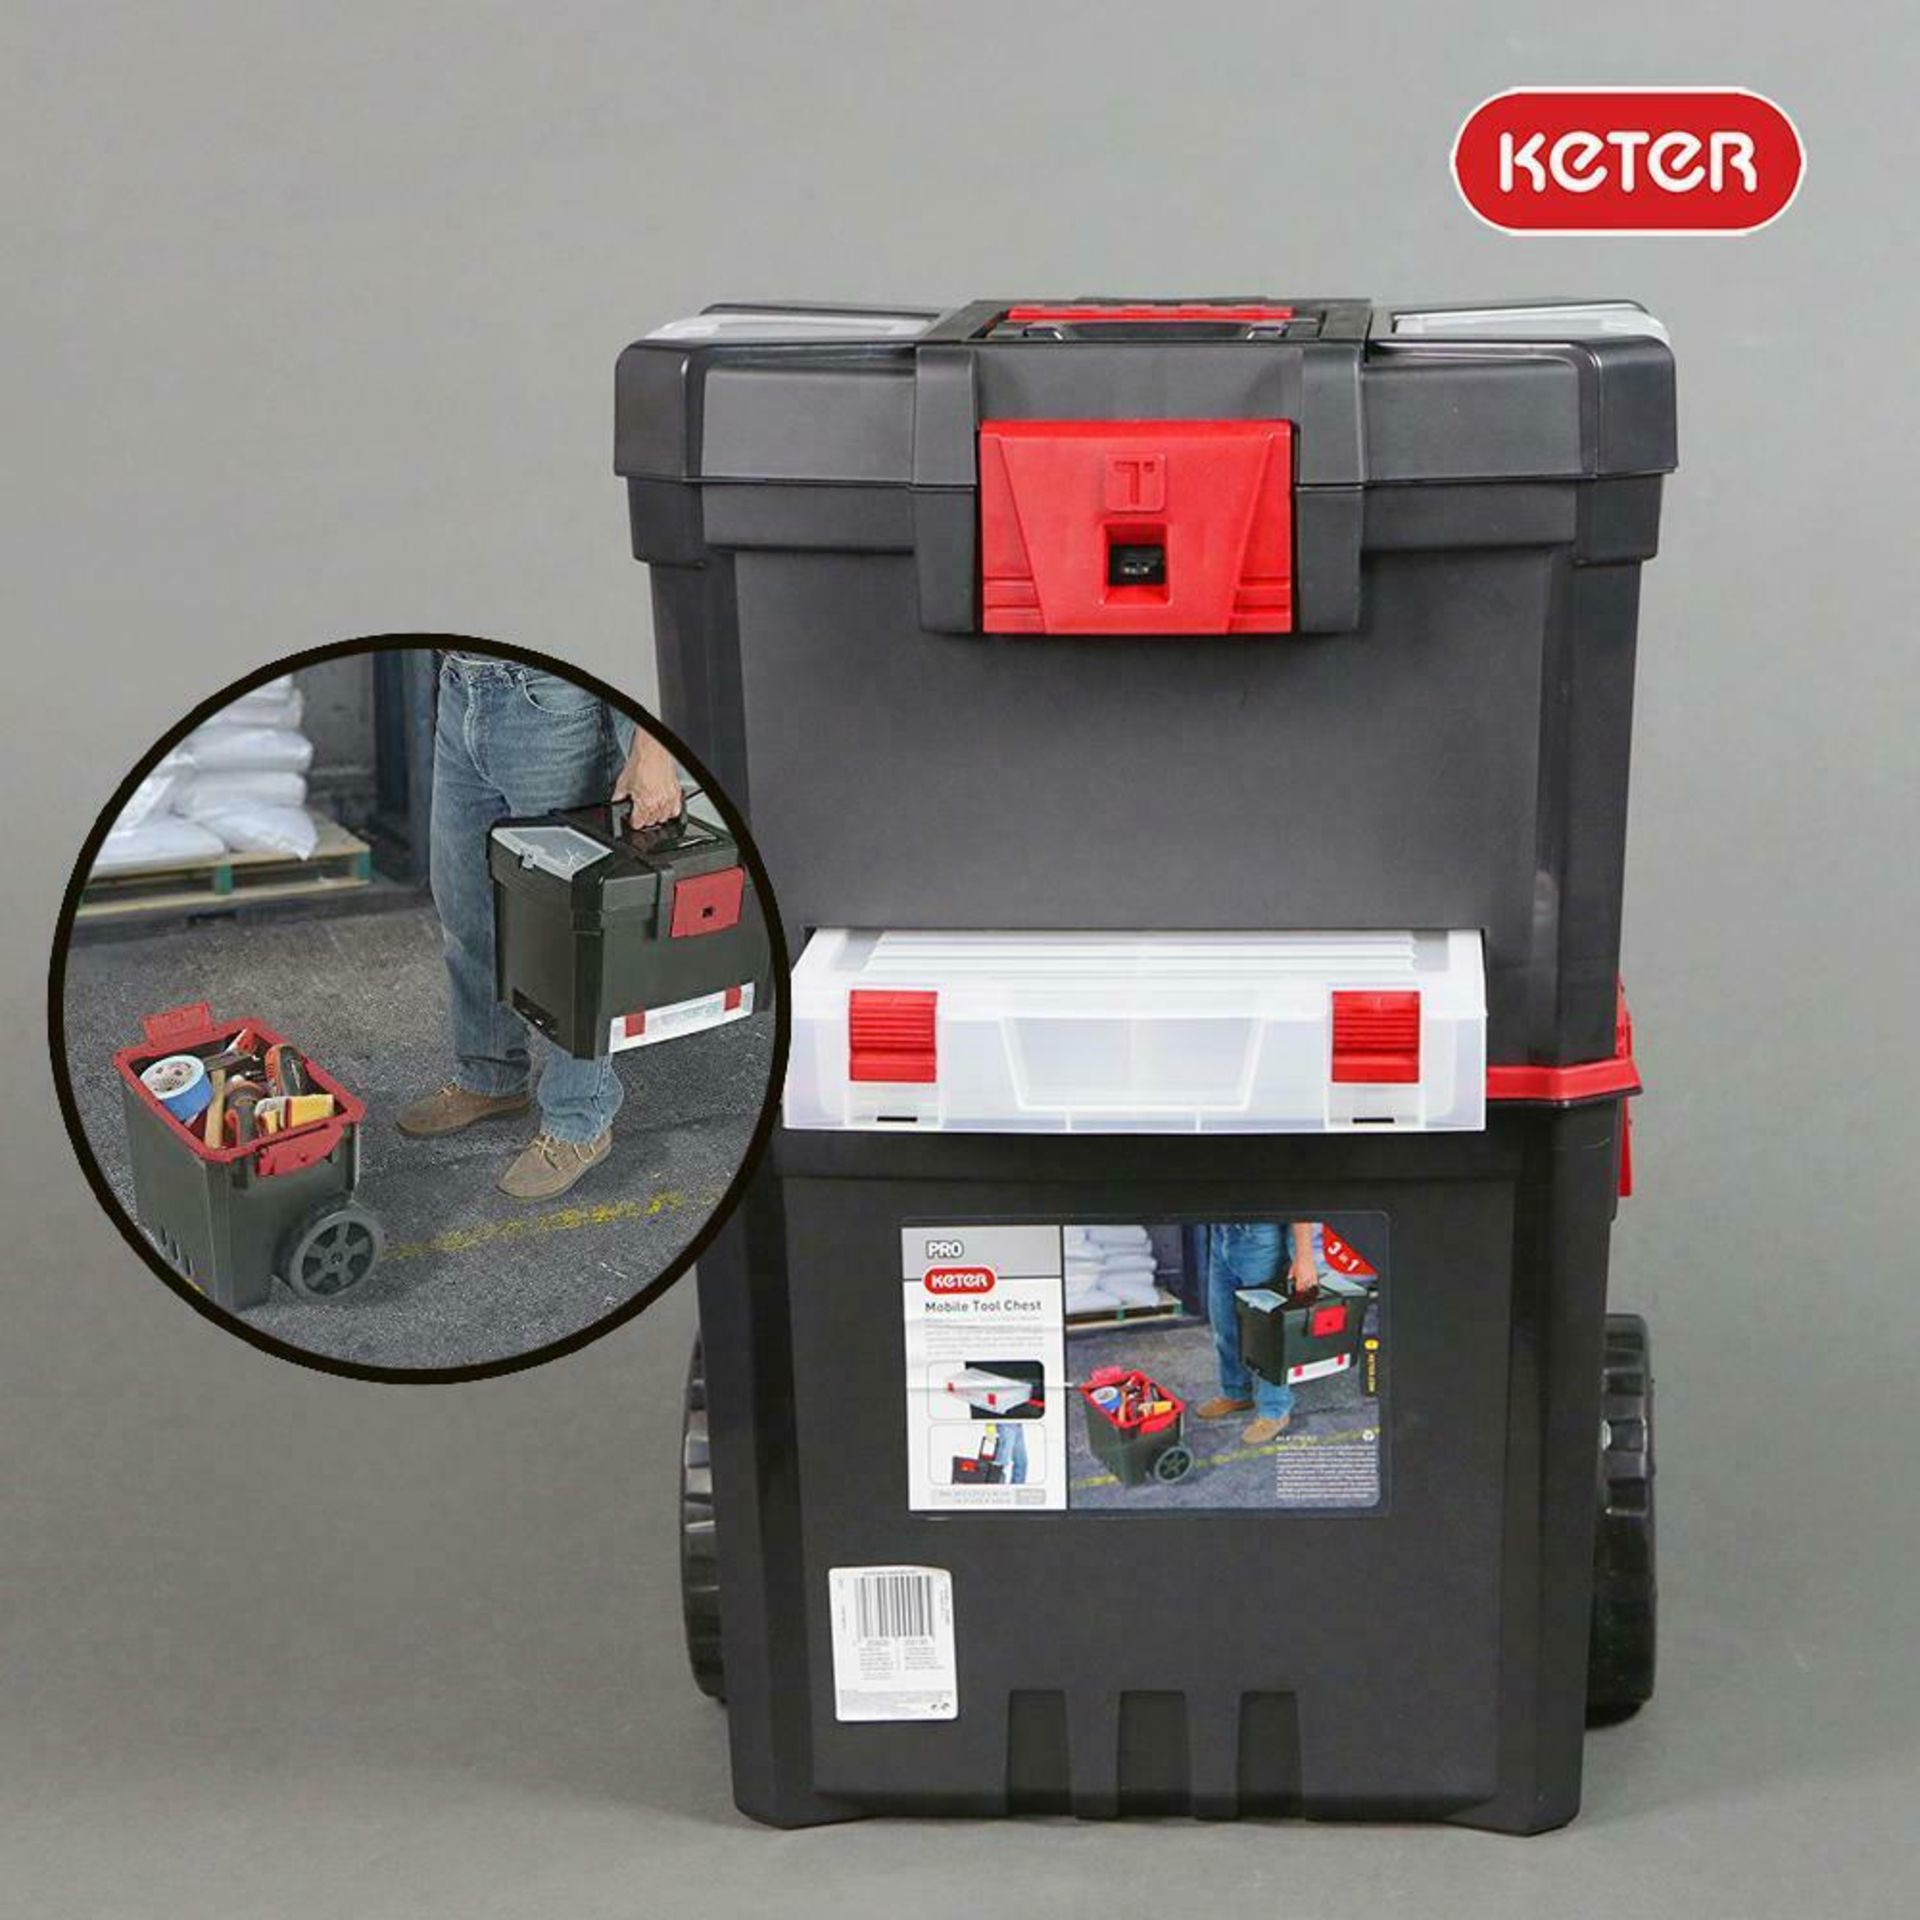 6 X BRAND NEW KETER MOBILE TOOL CHEST HAMMER MASTERCARTS 51.4L RRP £40 EACH R9